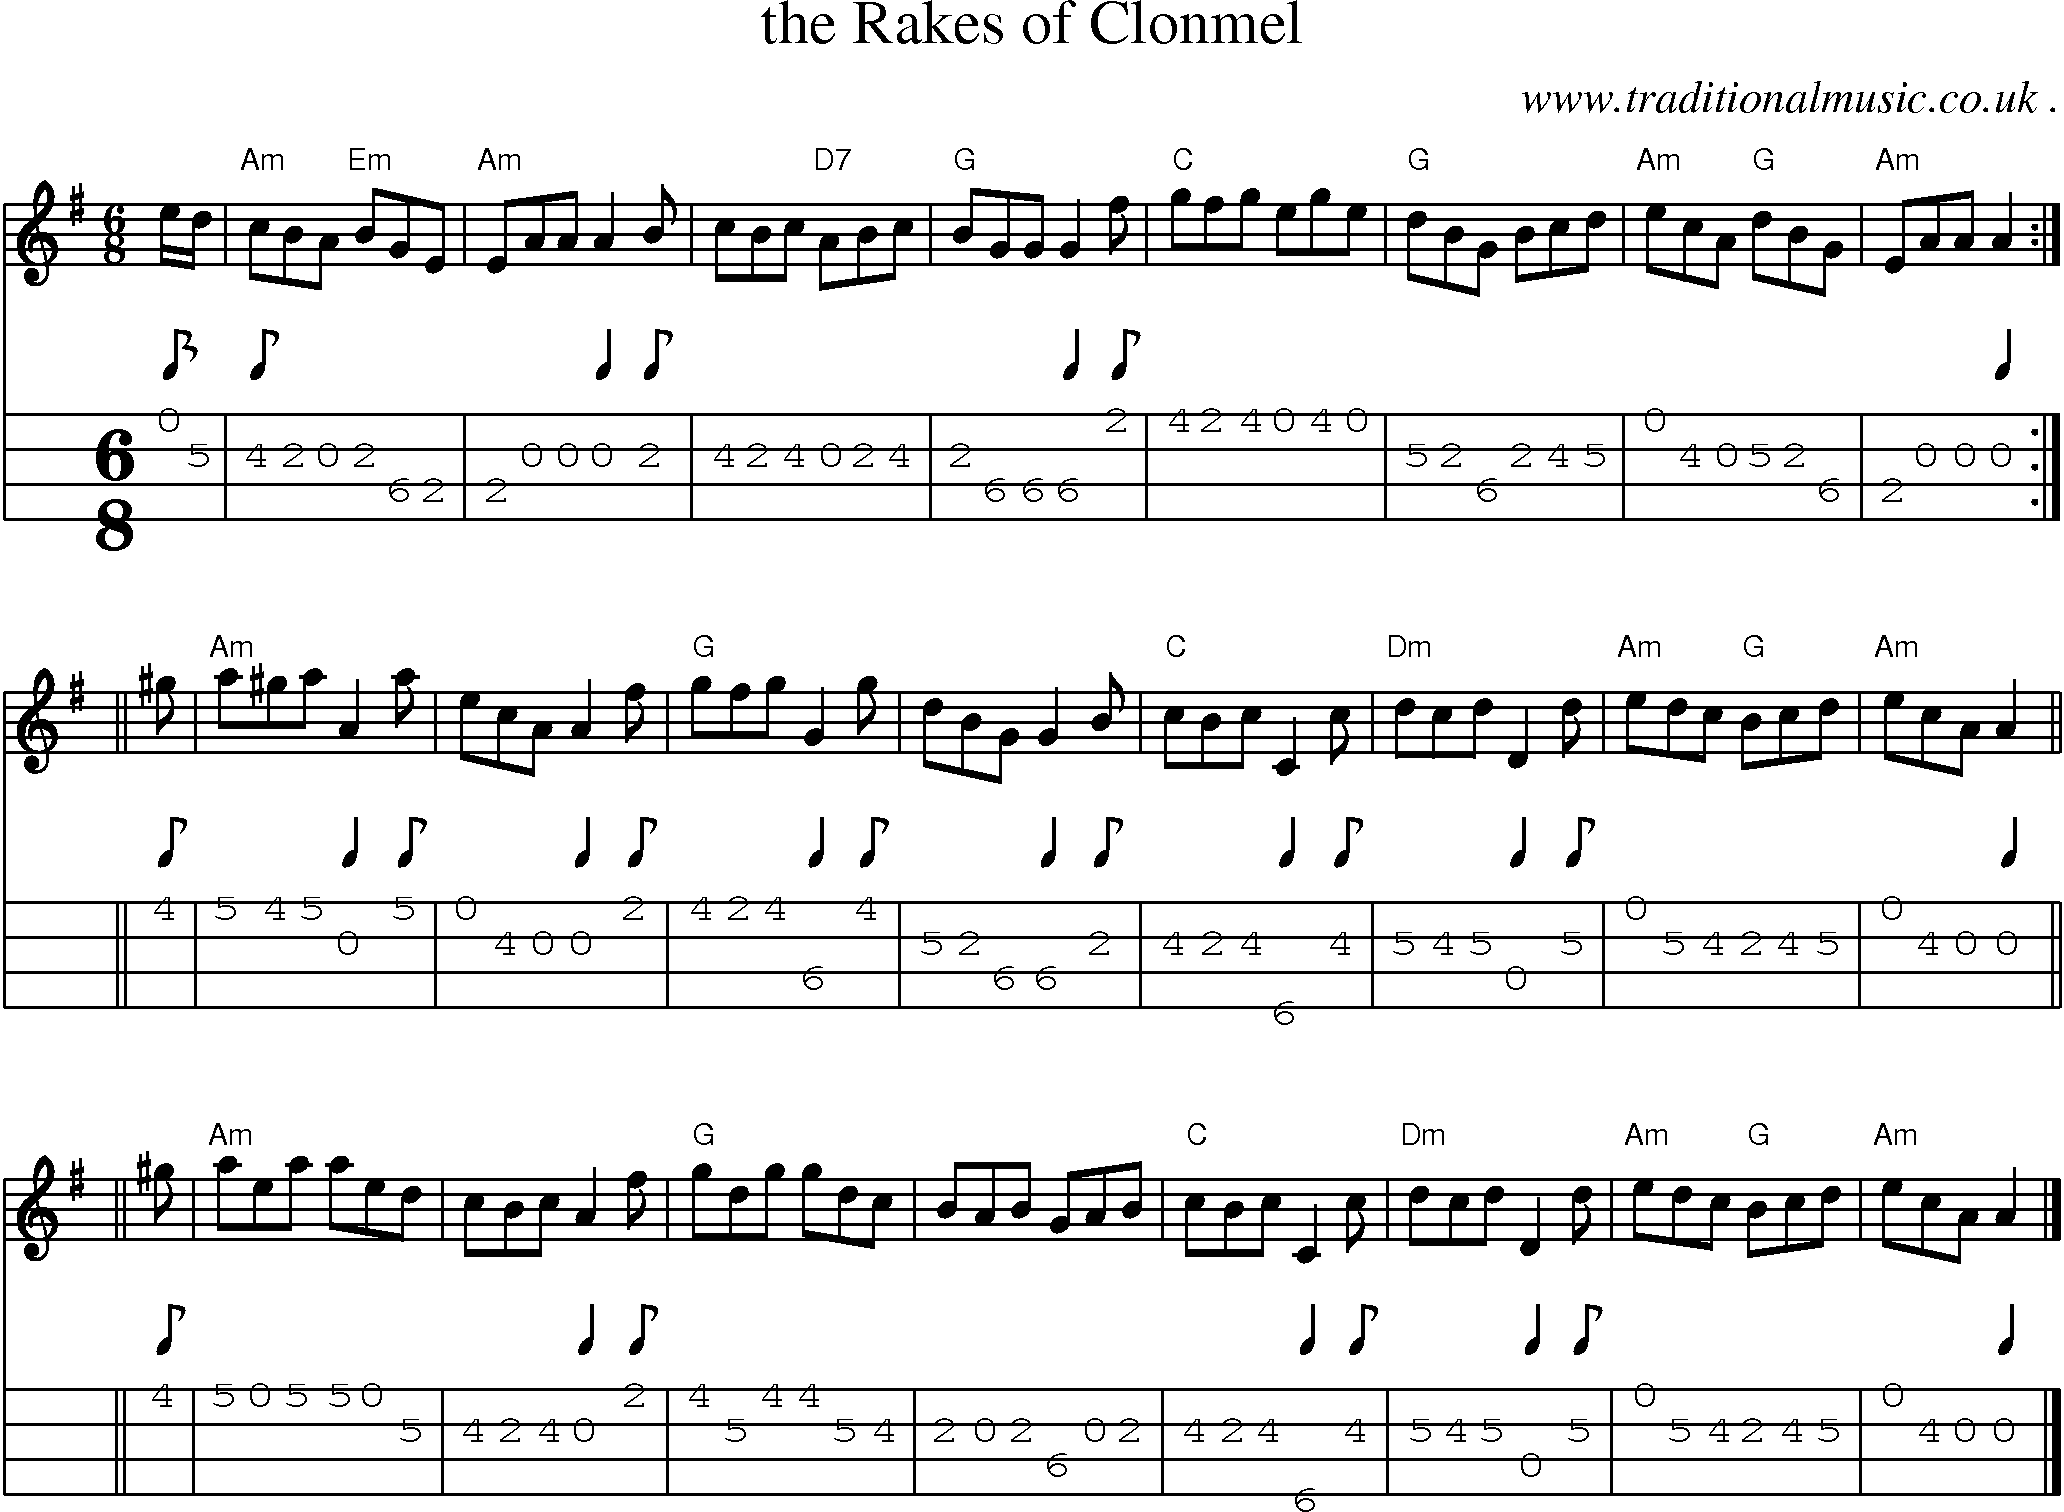 Sheet-music  score, Chords and Mandolin Tabs for The Rakes Of Clonmel